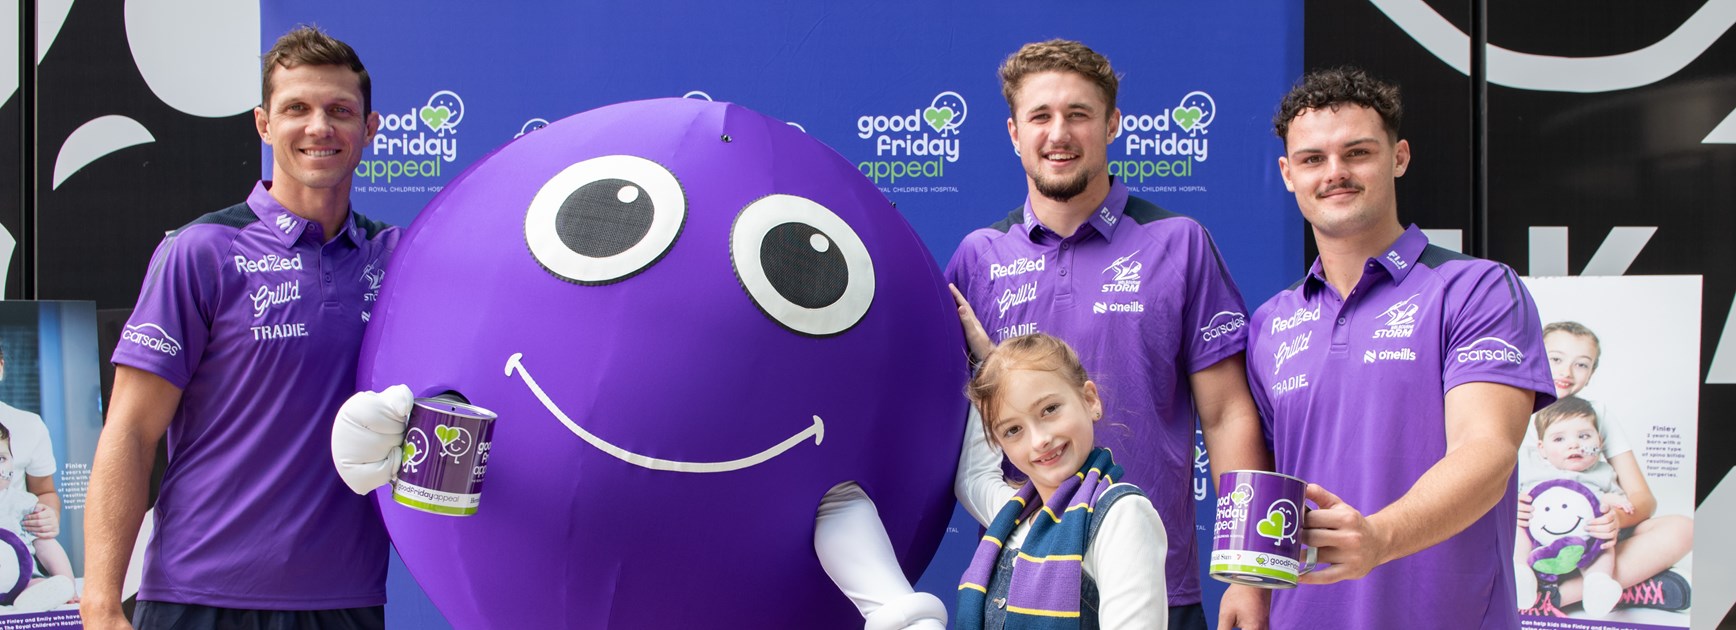 Storm continue support for Good Friday Appeal